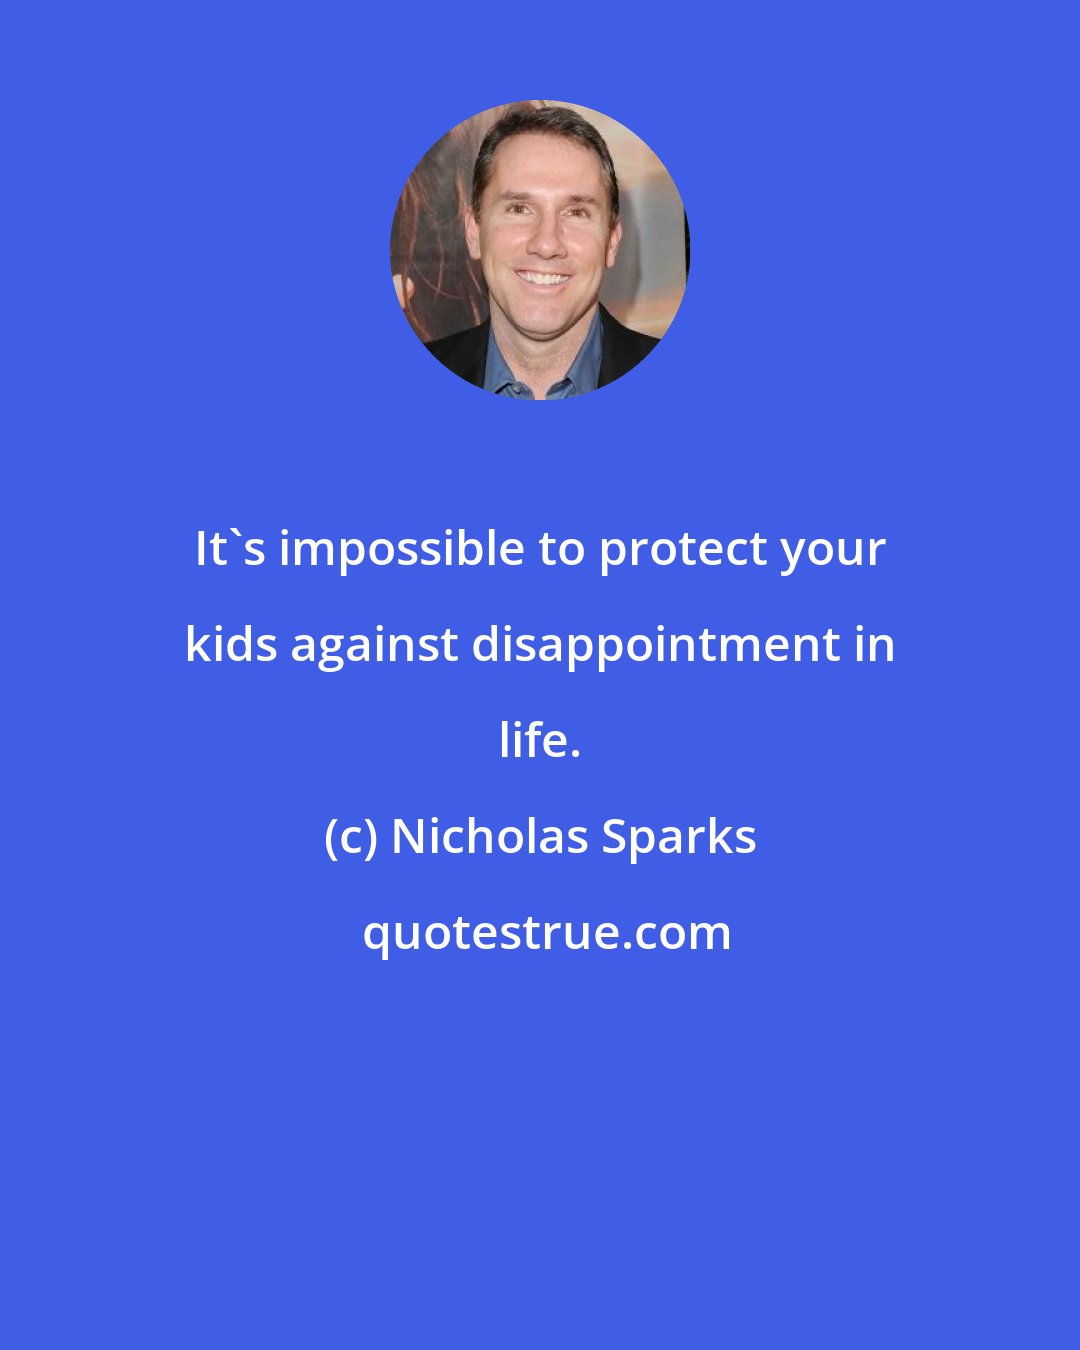 Nicholas Sparks: It's impossible to protect your kids against disappointment in life.